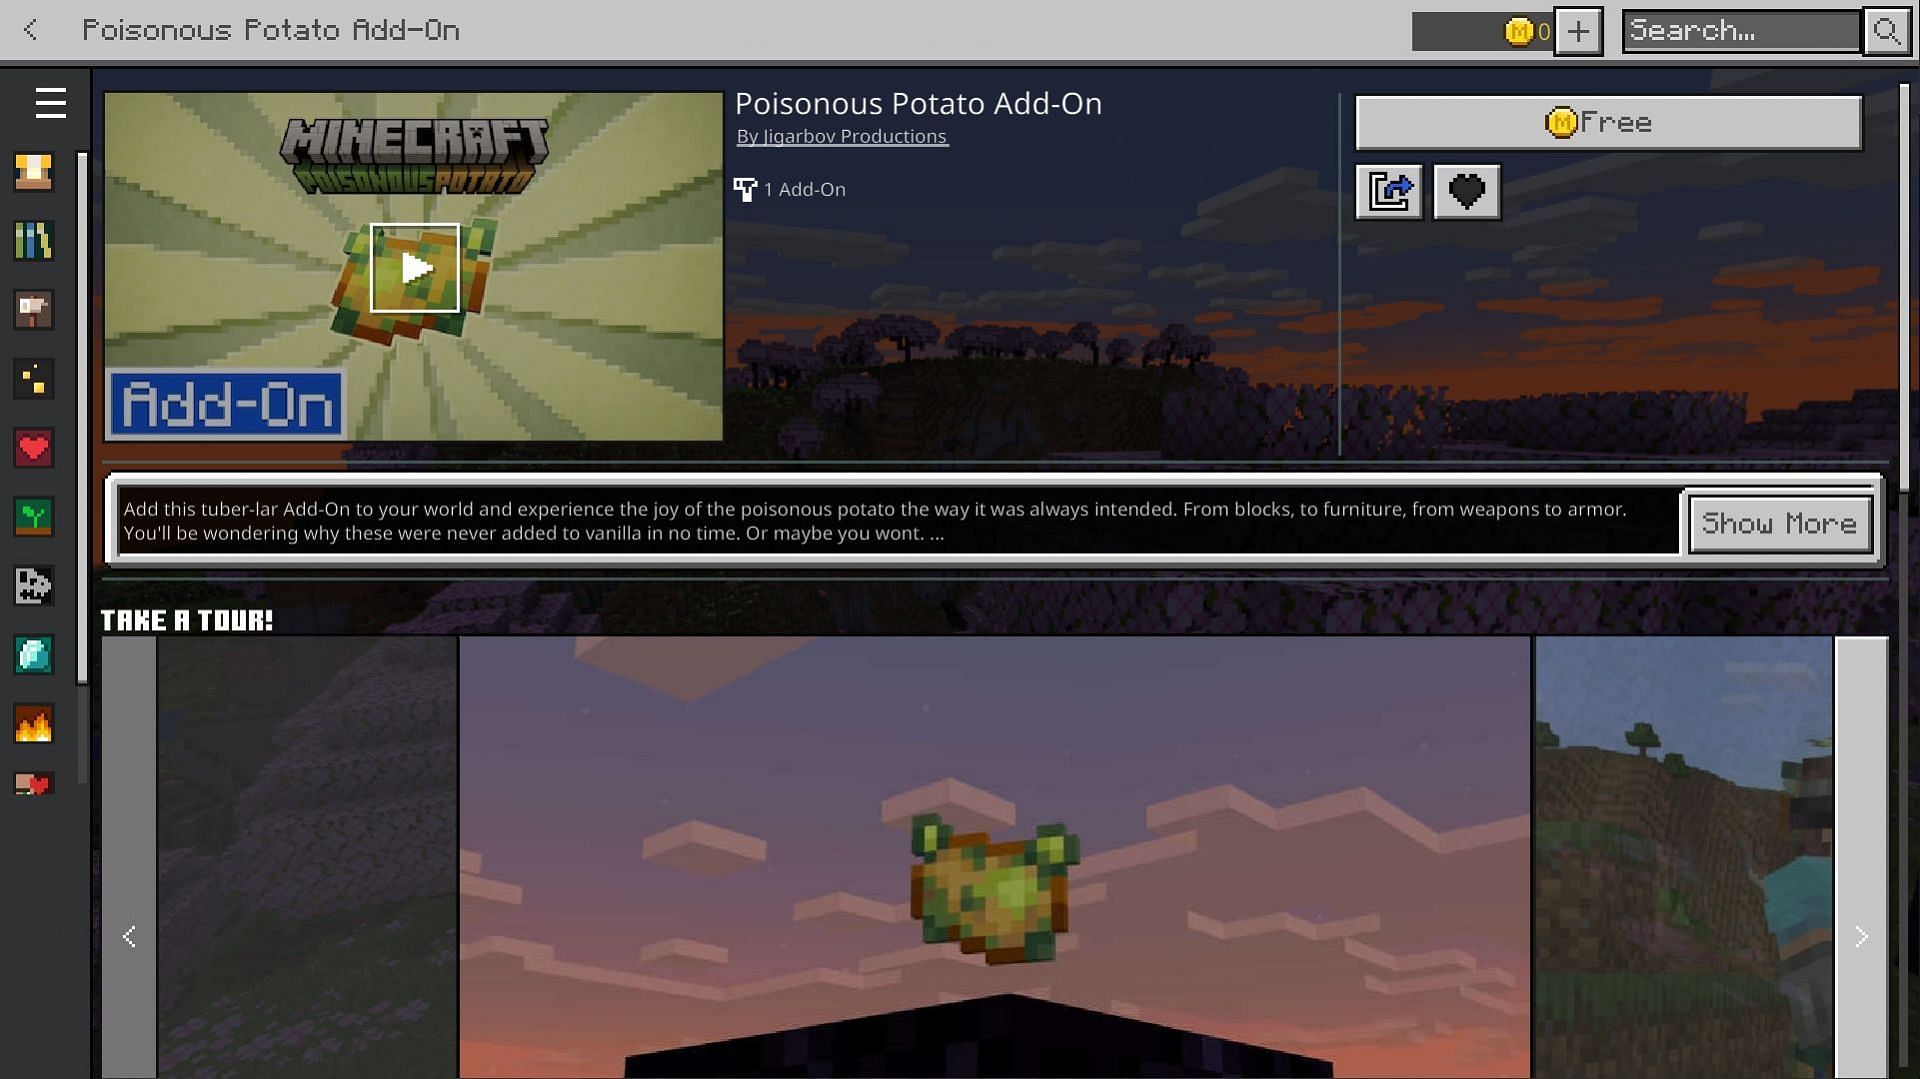 Poisonous Potato add-on can be easily found on the Marketplace (Image via Mojang Studios)